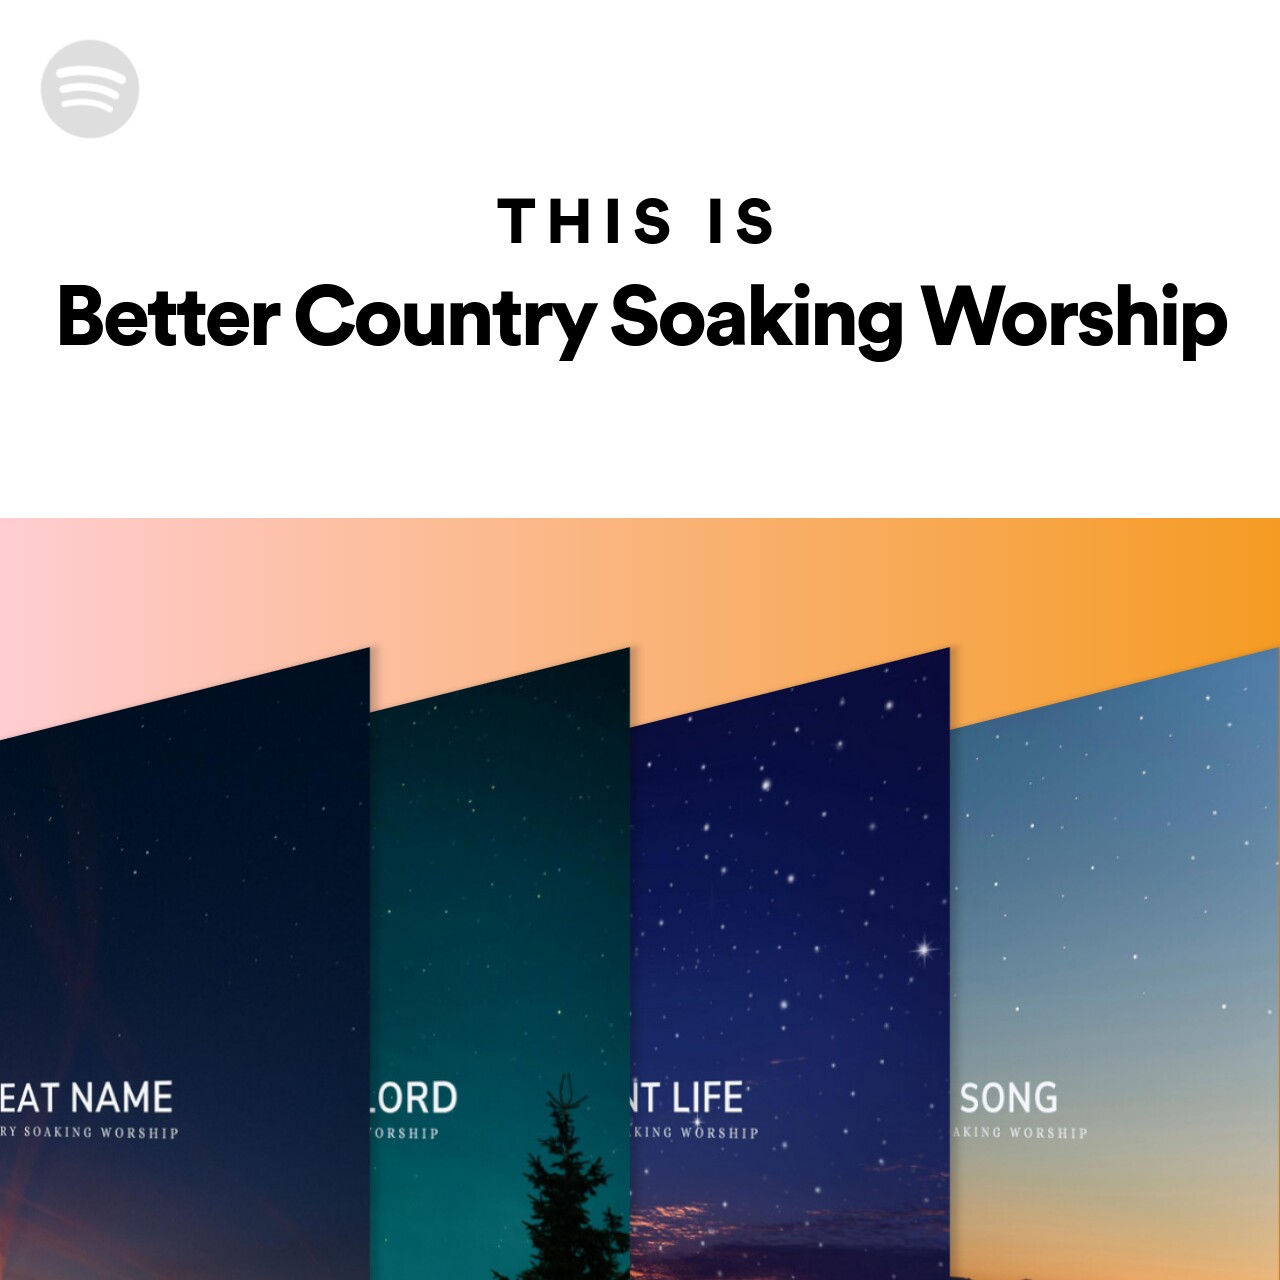 This Is Better Country Soaking Worship